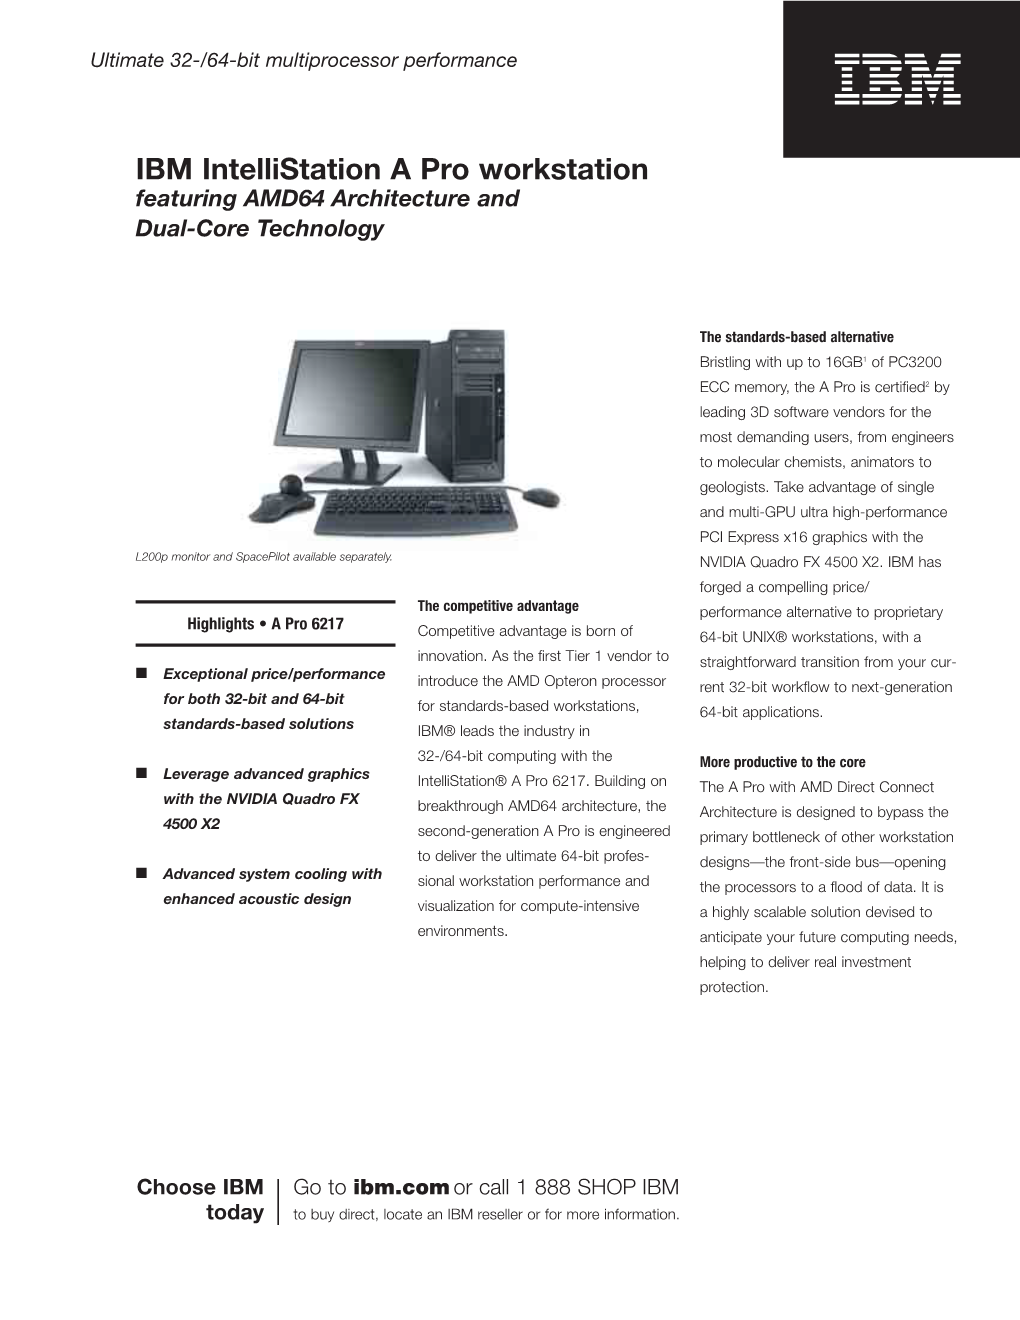 IBM Intellistation a Pro Workstation Featuring AMD64 Architecture and Dual-Core Technology